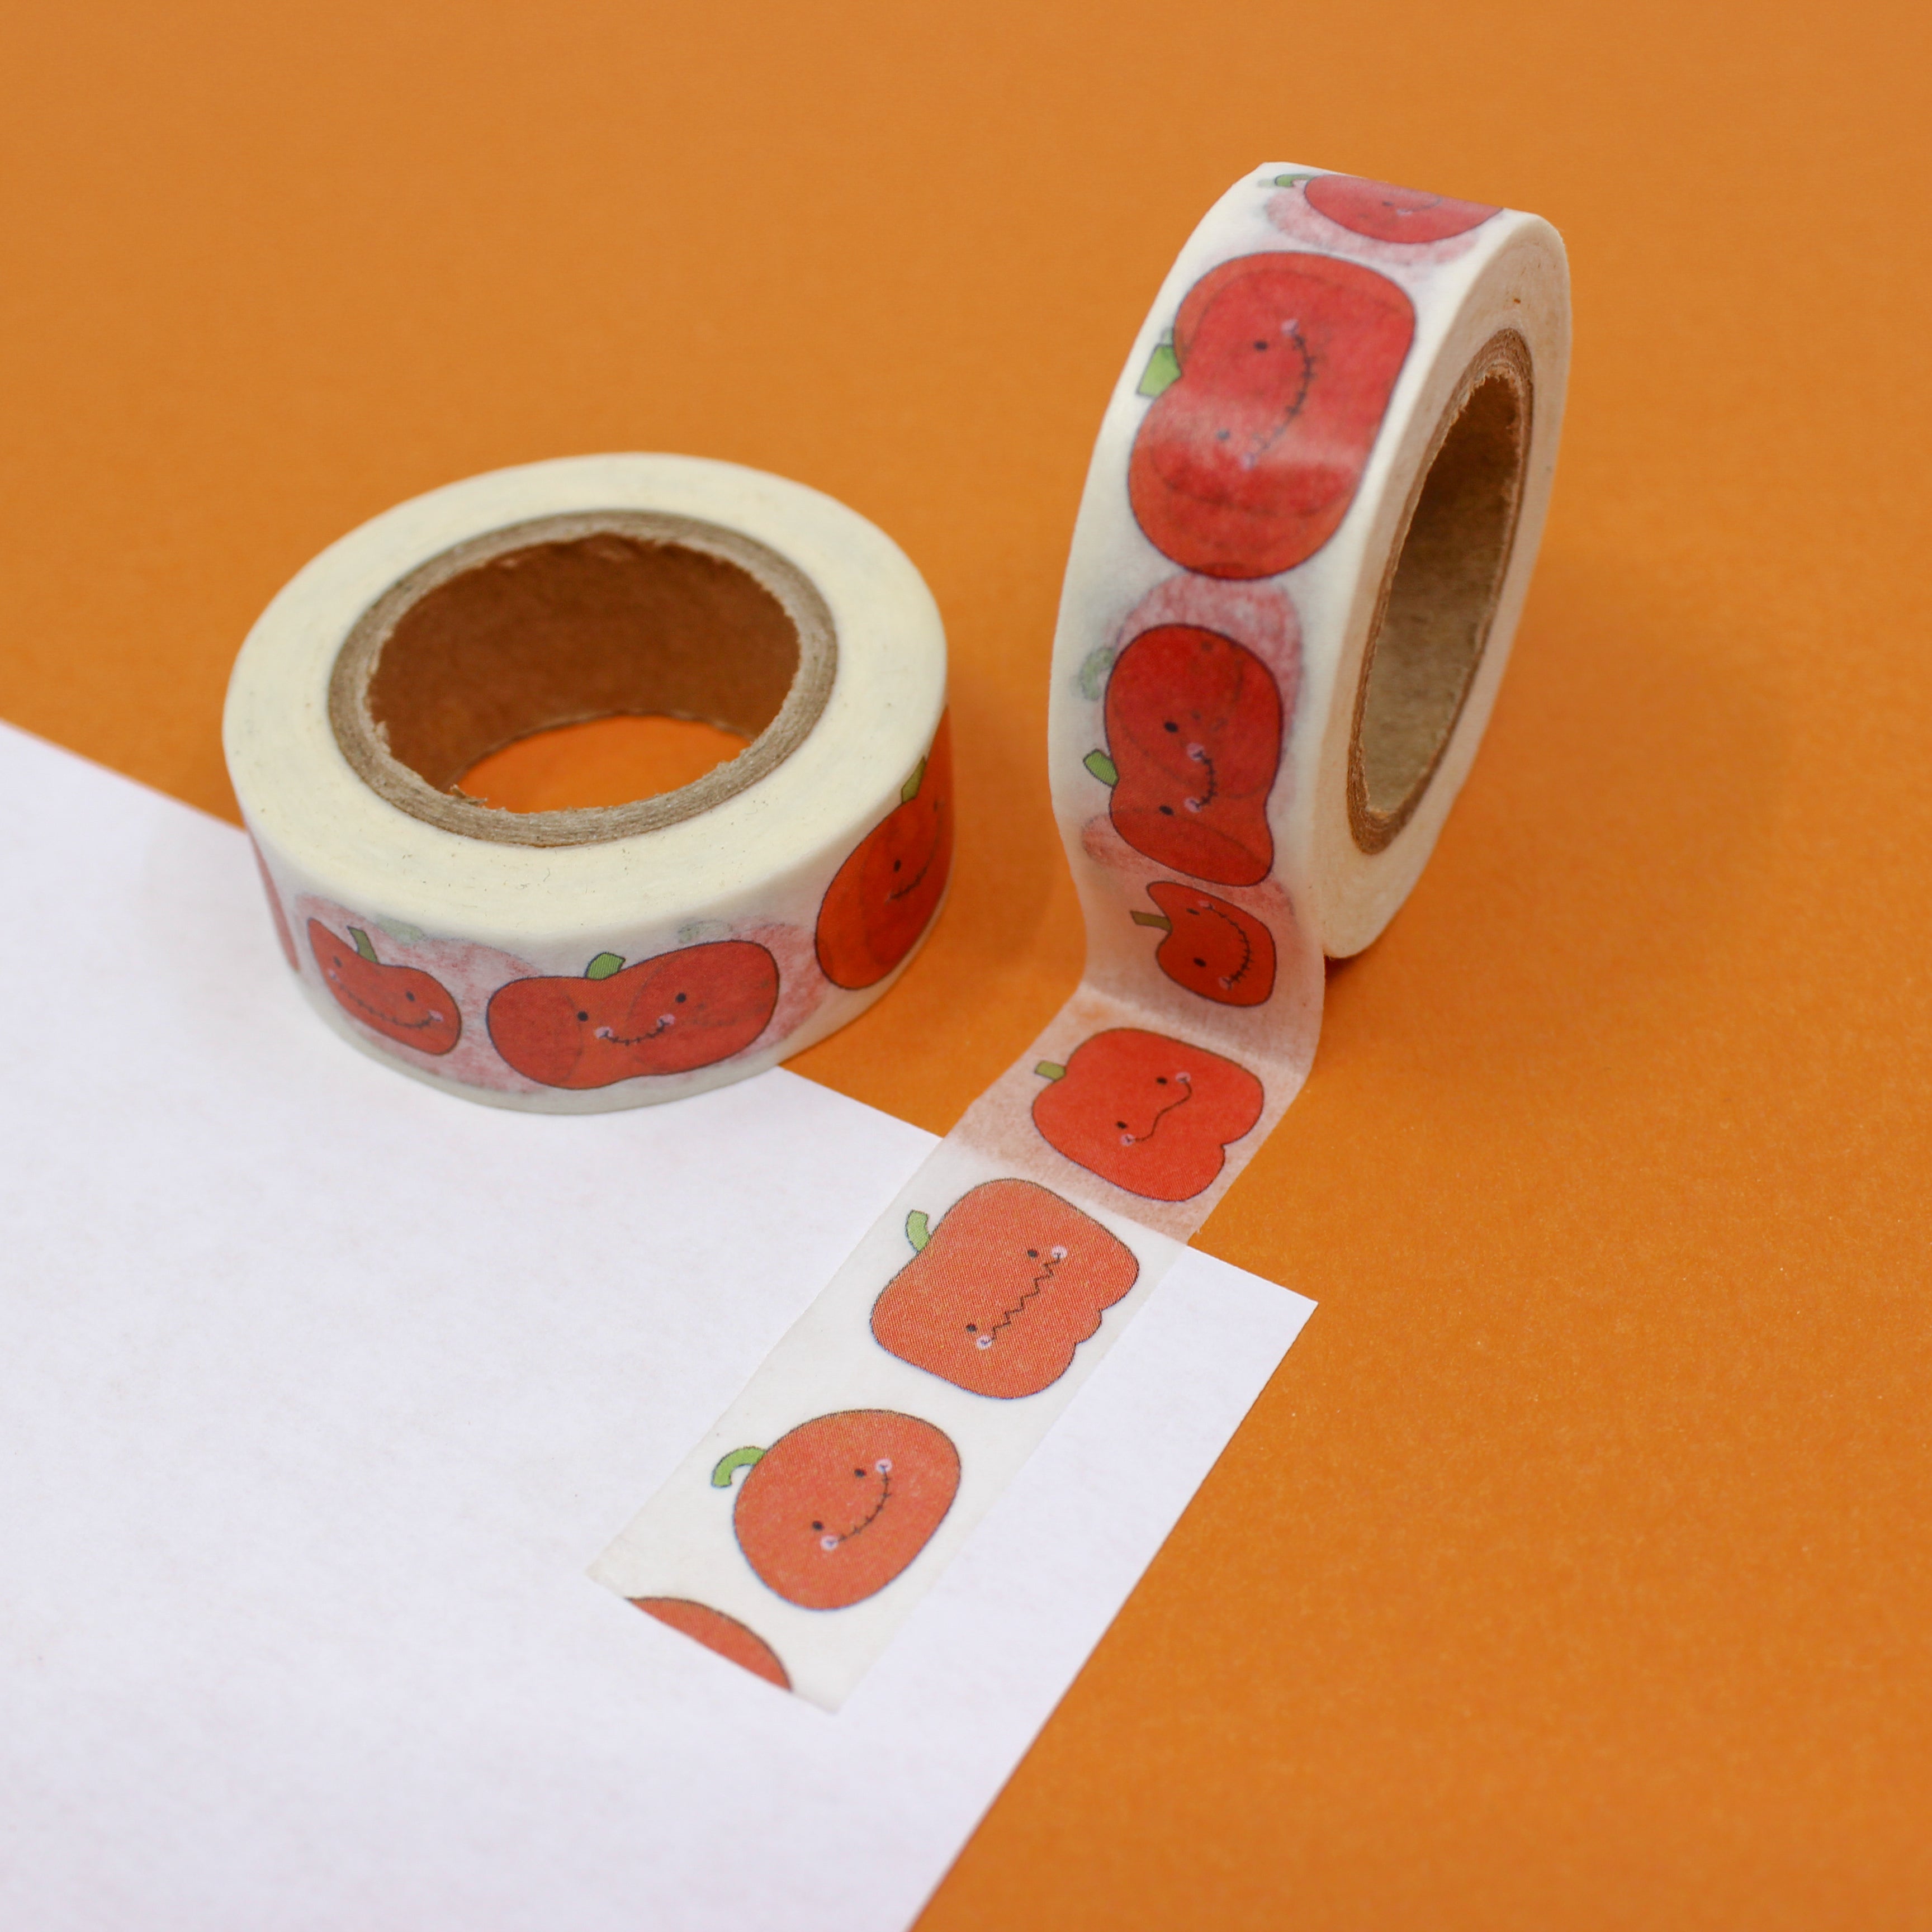 This is a silly pumpkin smile pattern washi tape from BBB Supplies Craft Shop